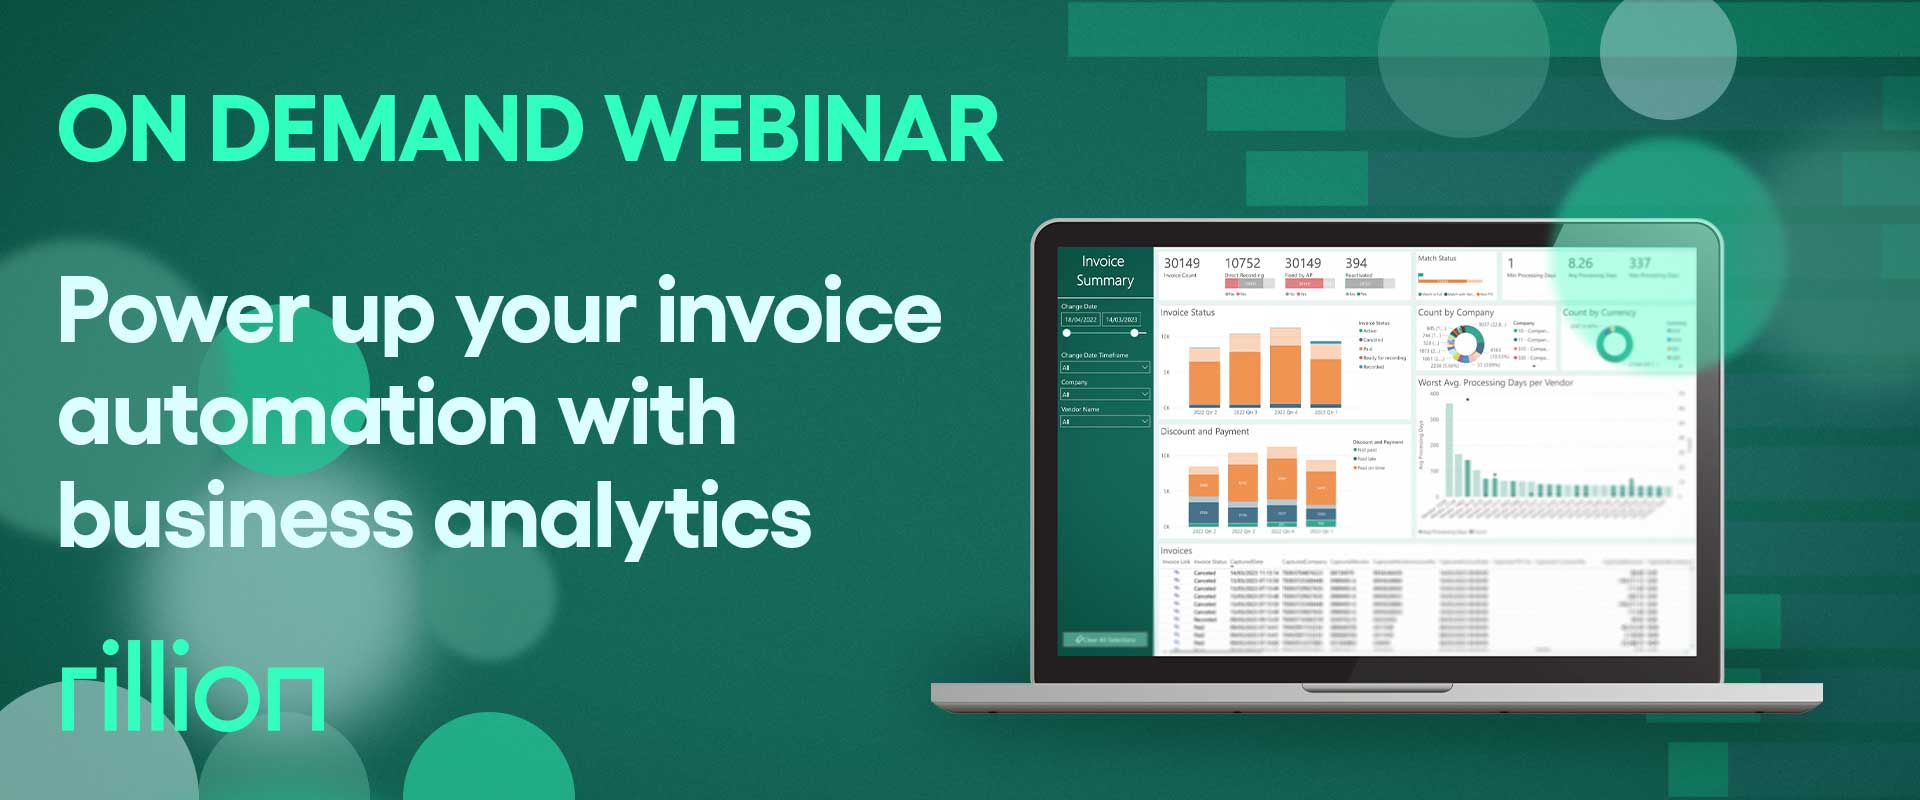 Power up your Invoice Automation with Business Analytics Webina On Demand